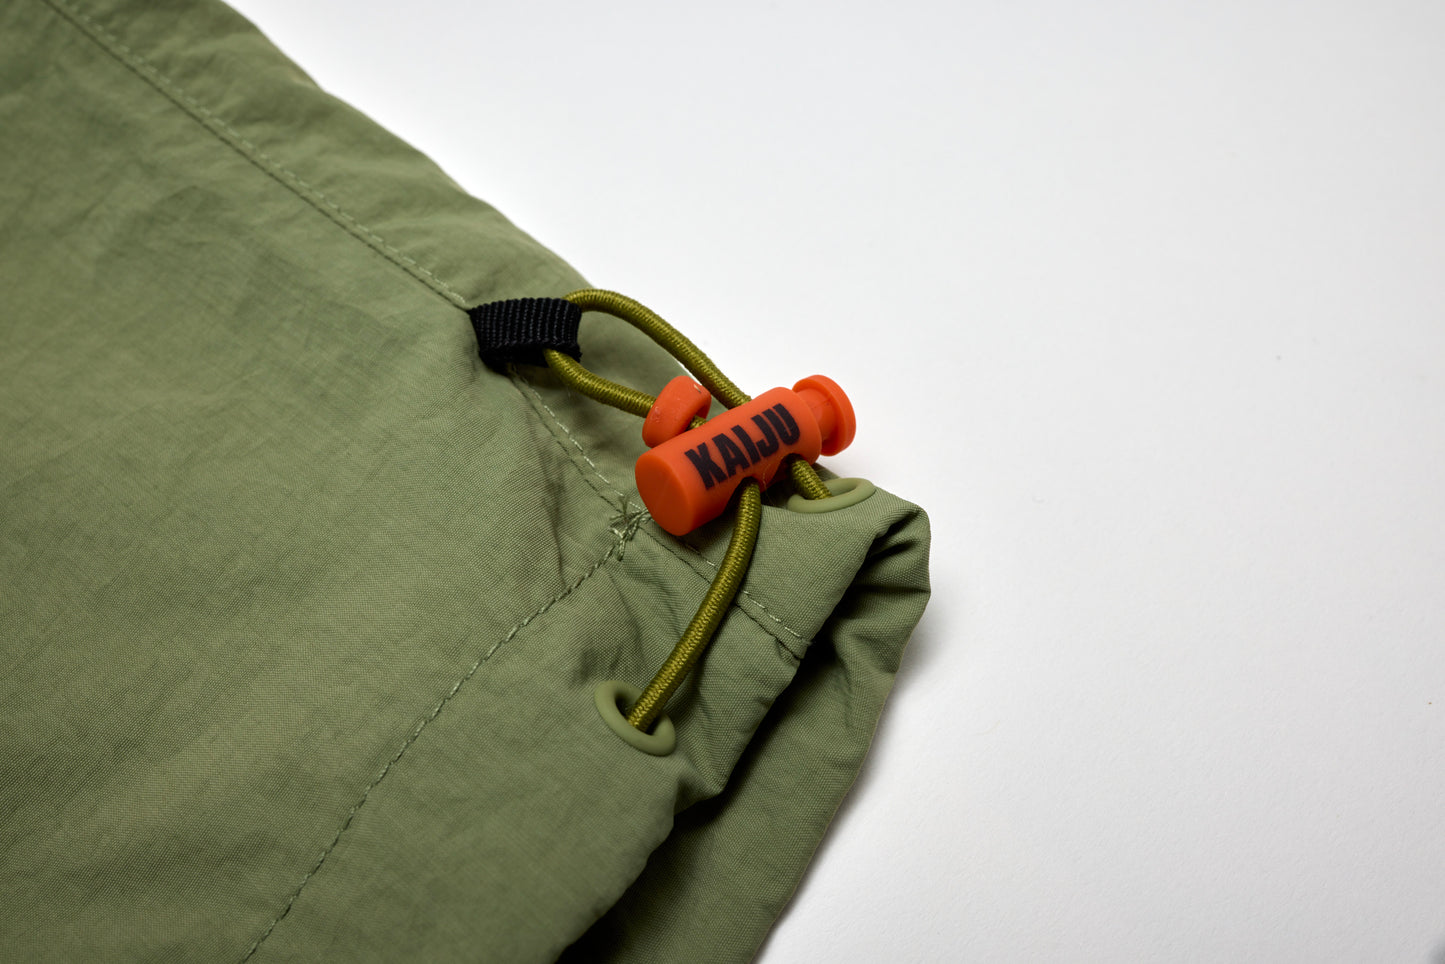 Olive Green Pleated Stay Focused Nylon Pants